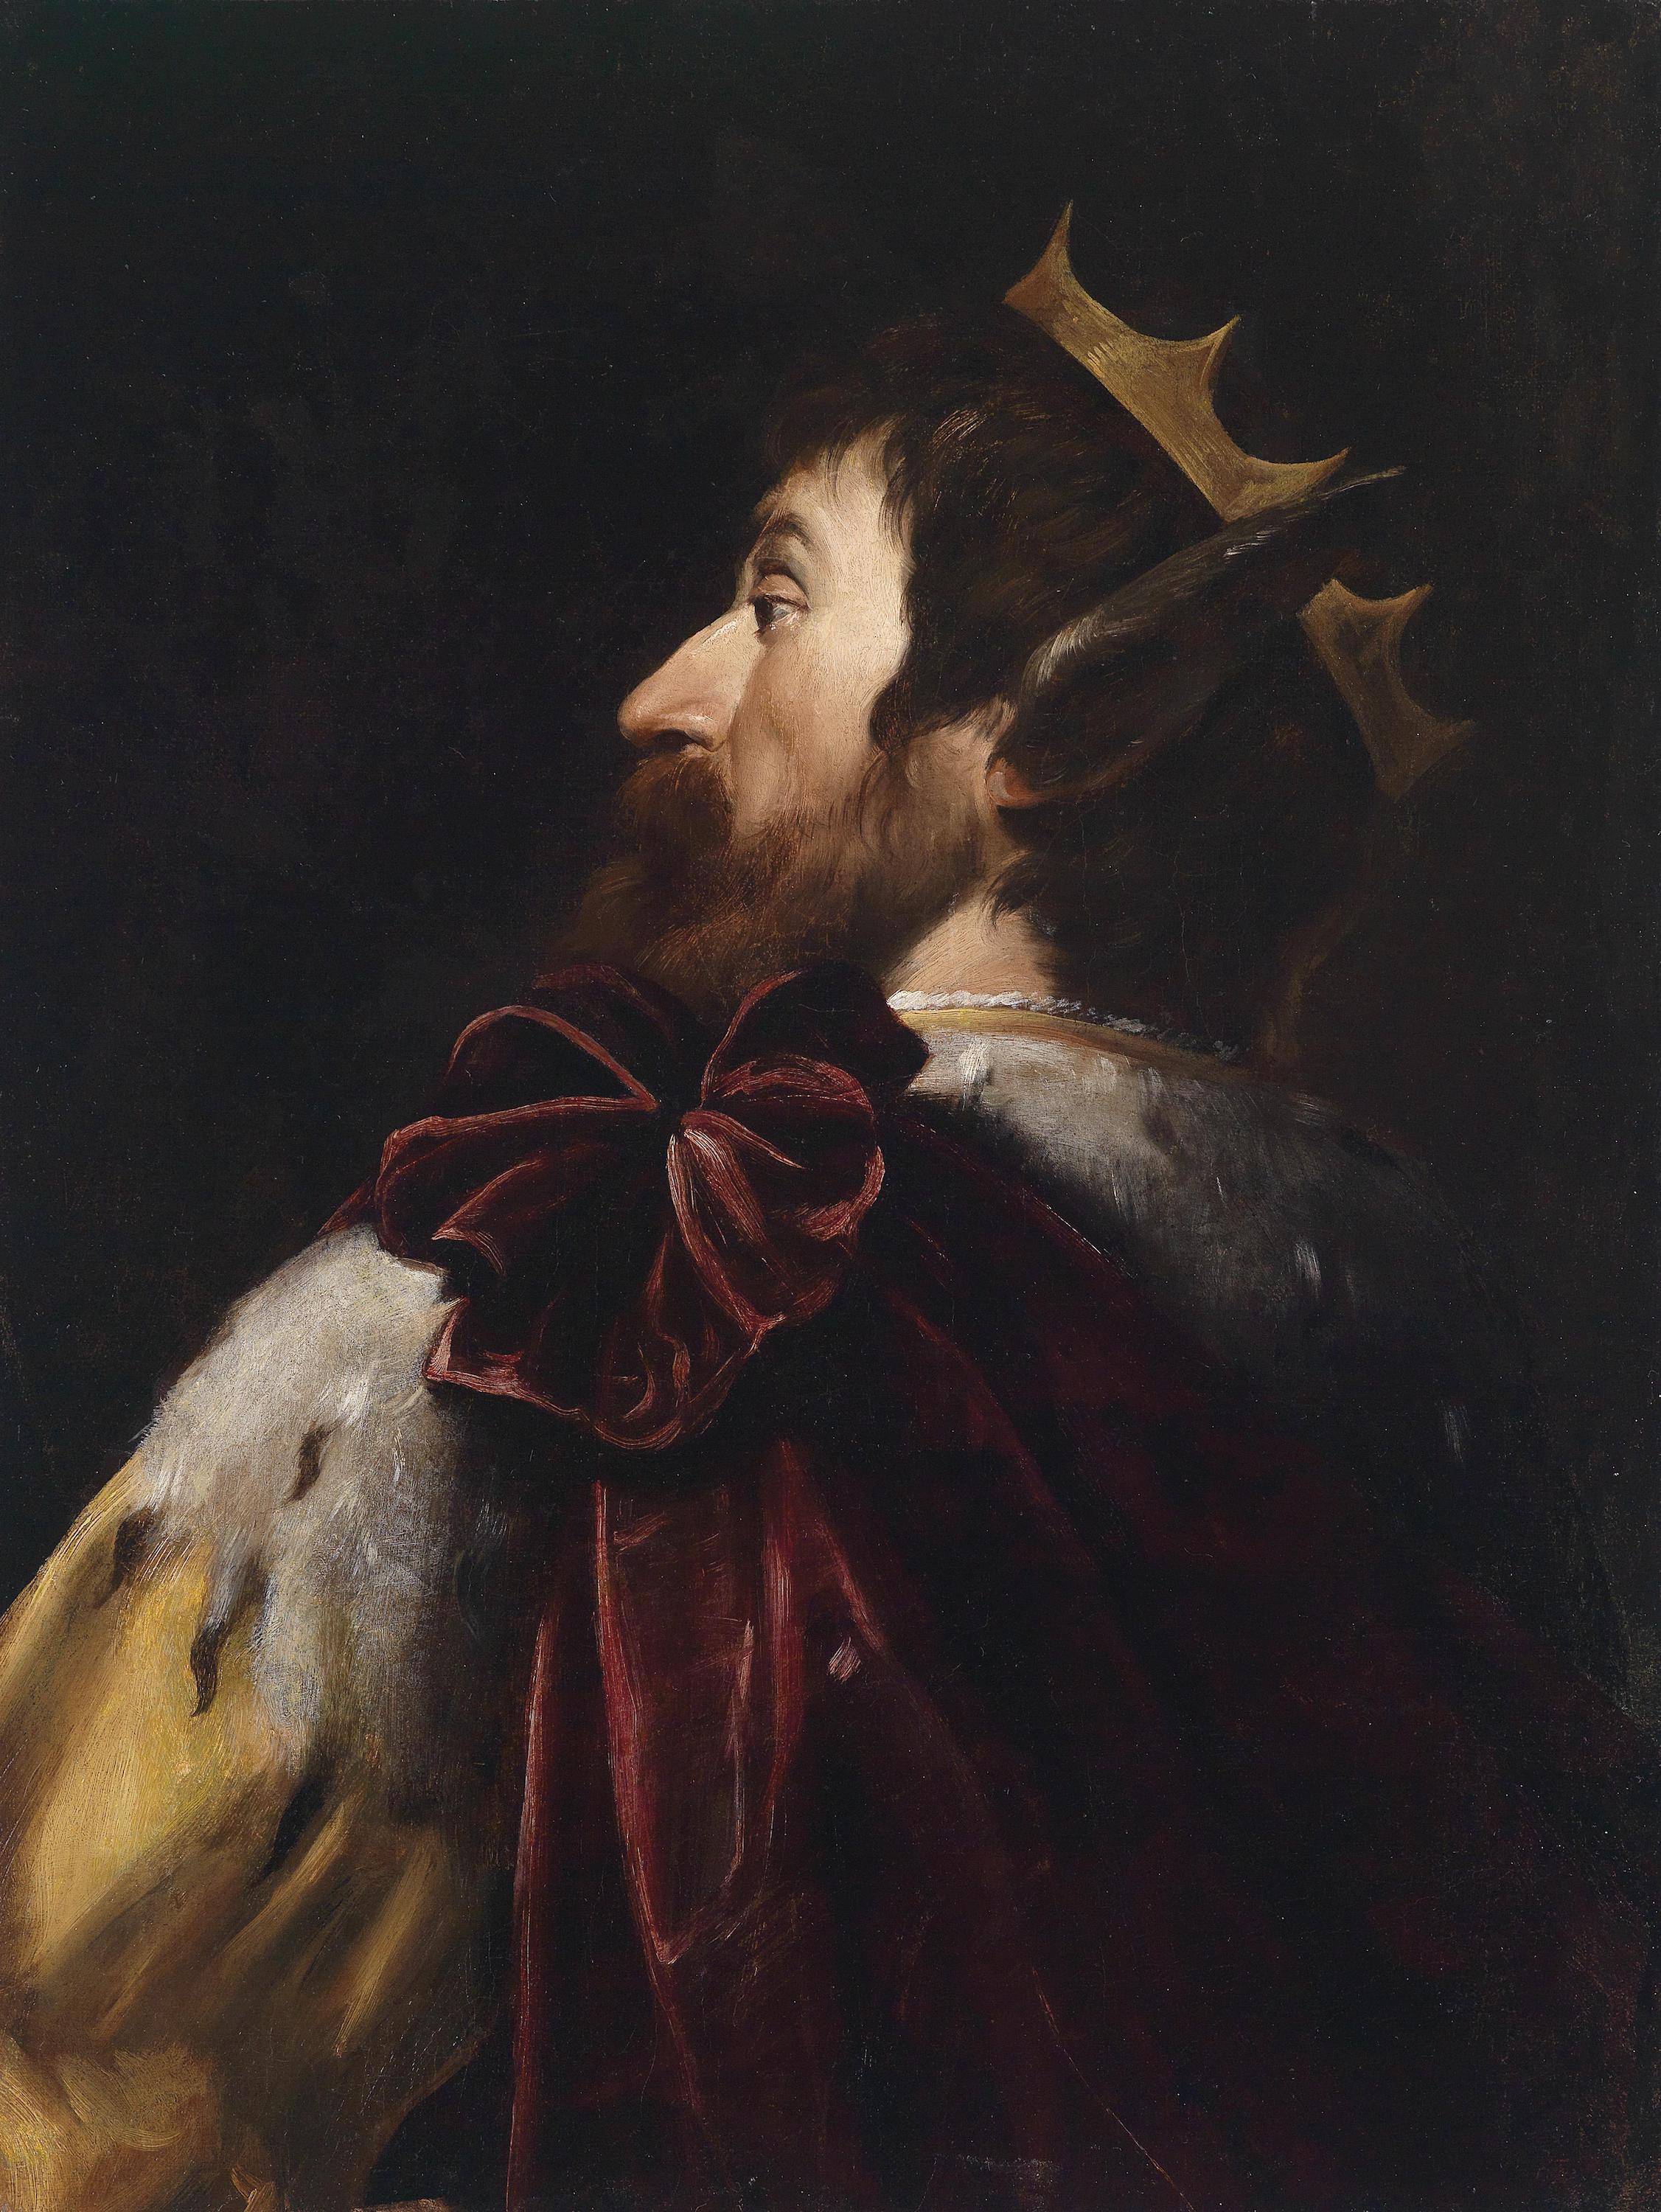 King Midas by Andrea Vaccaro - c. 1620-70 private collection